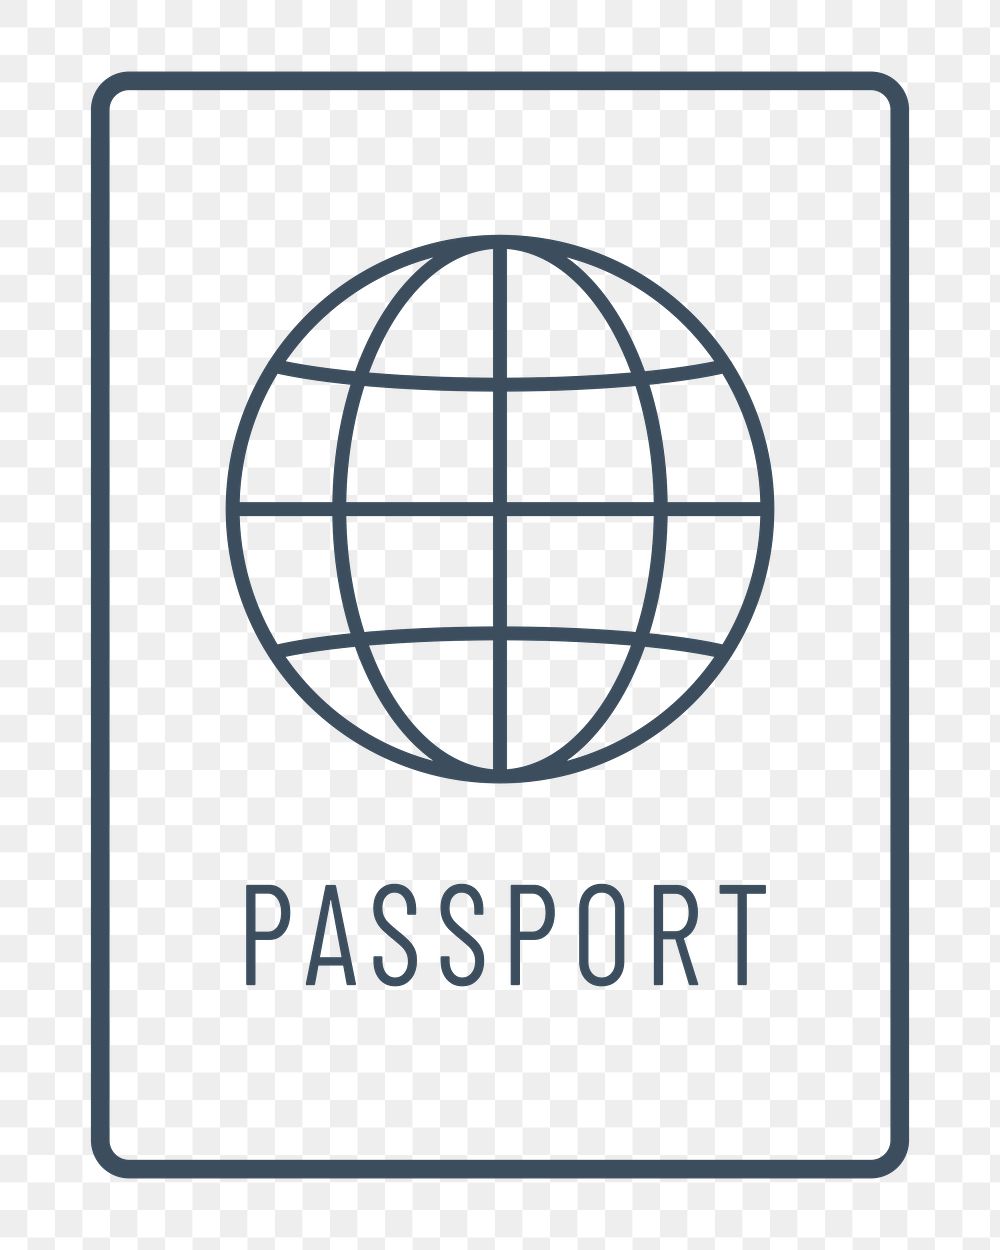 PNG outline travel passport icon, transparent background